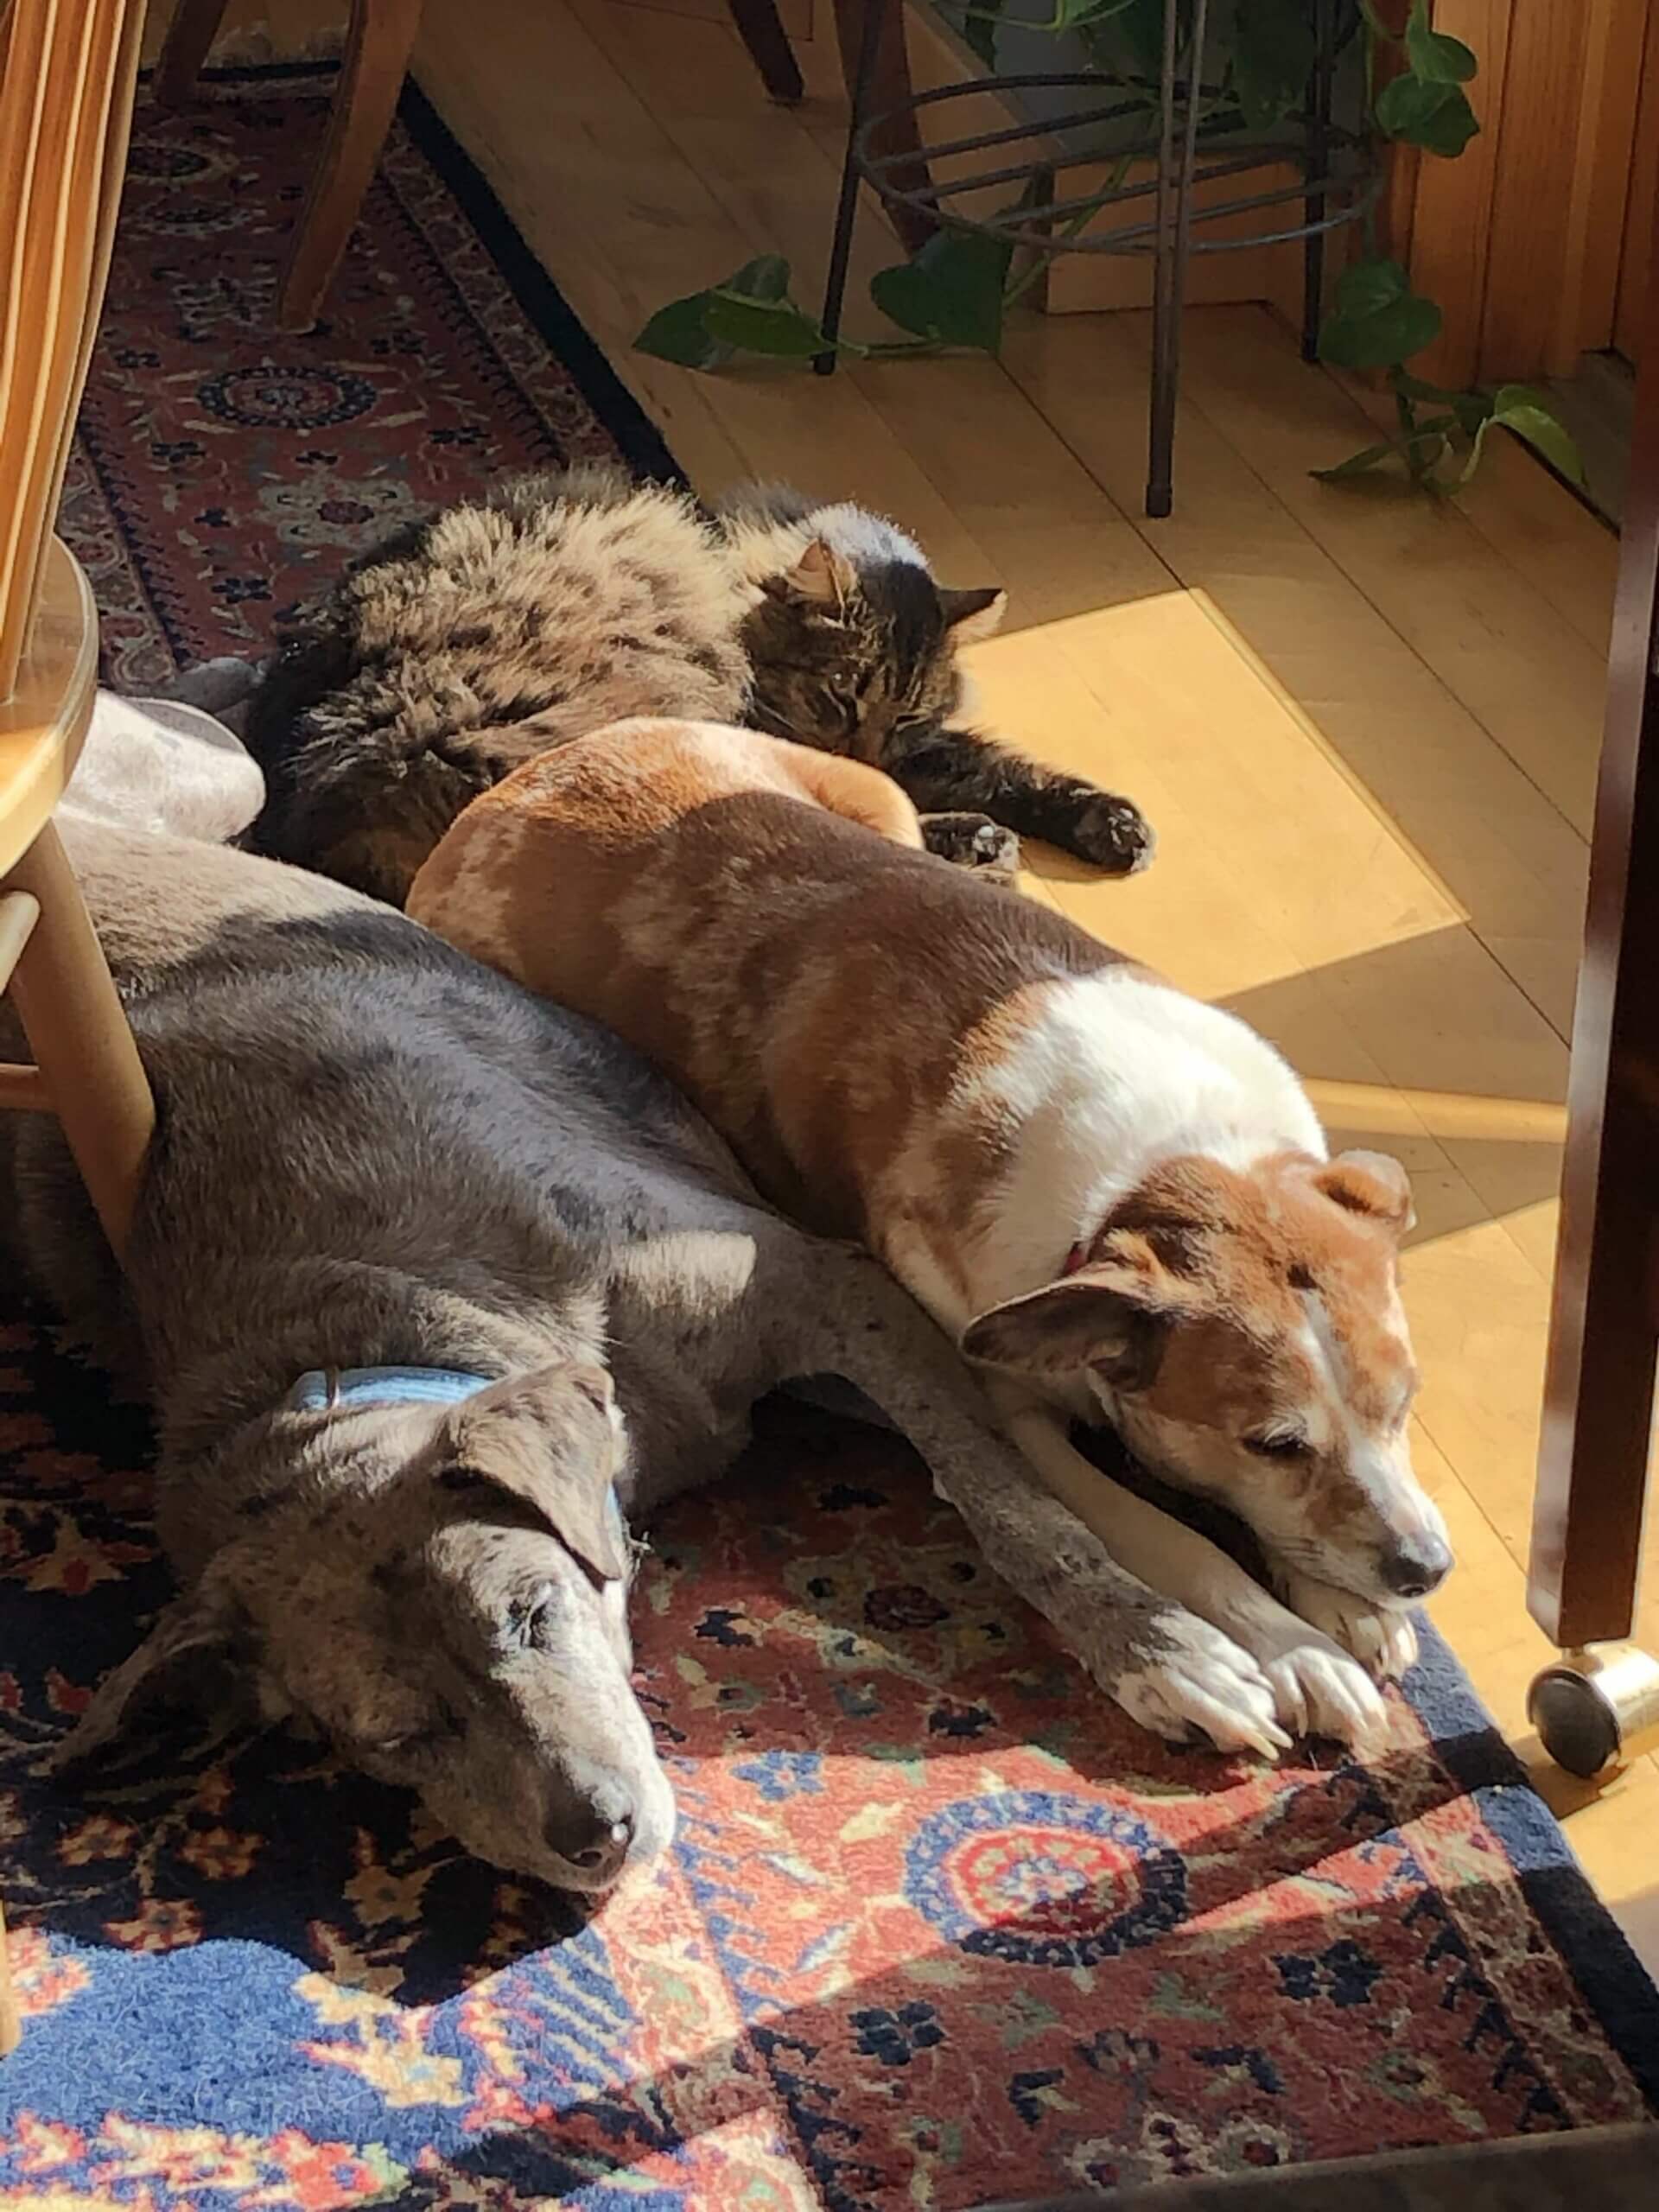 Photo: Two dogs and a cat lie together on a carpeted floor runner.